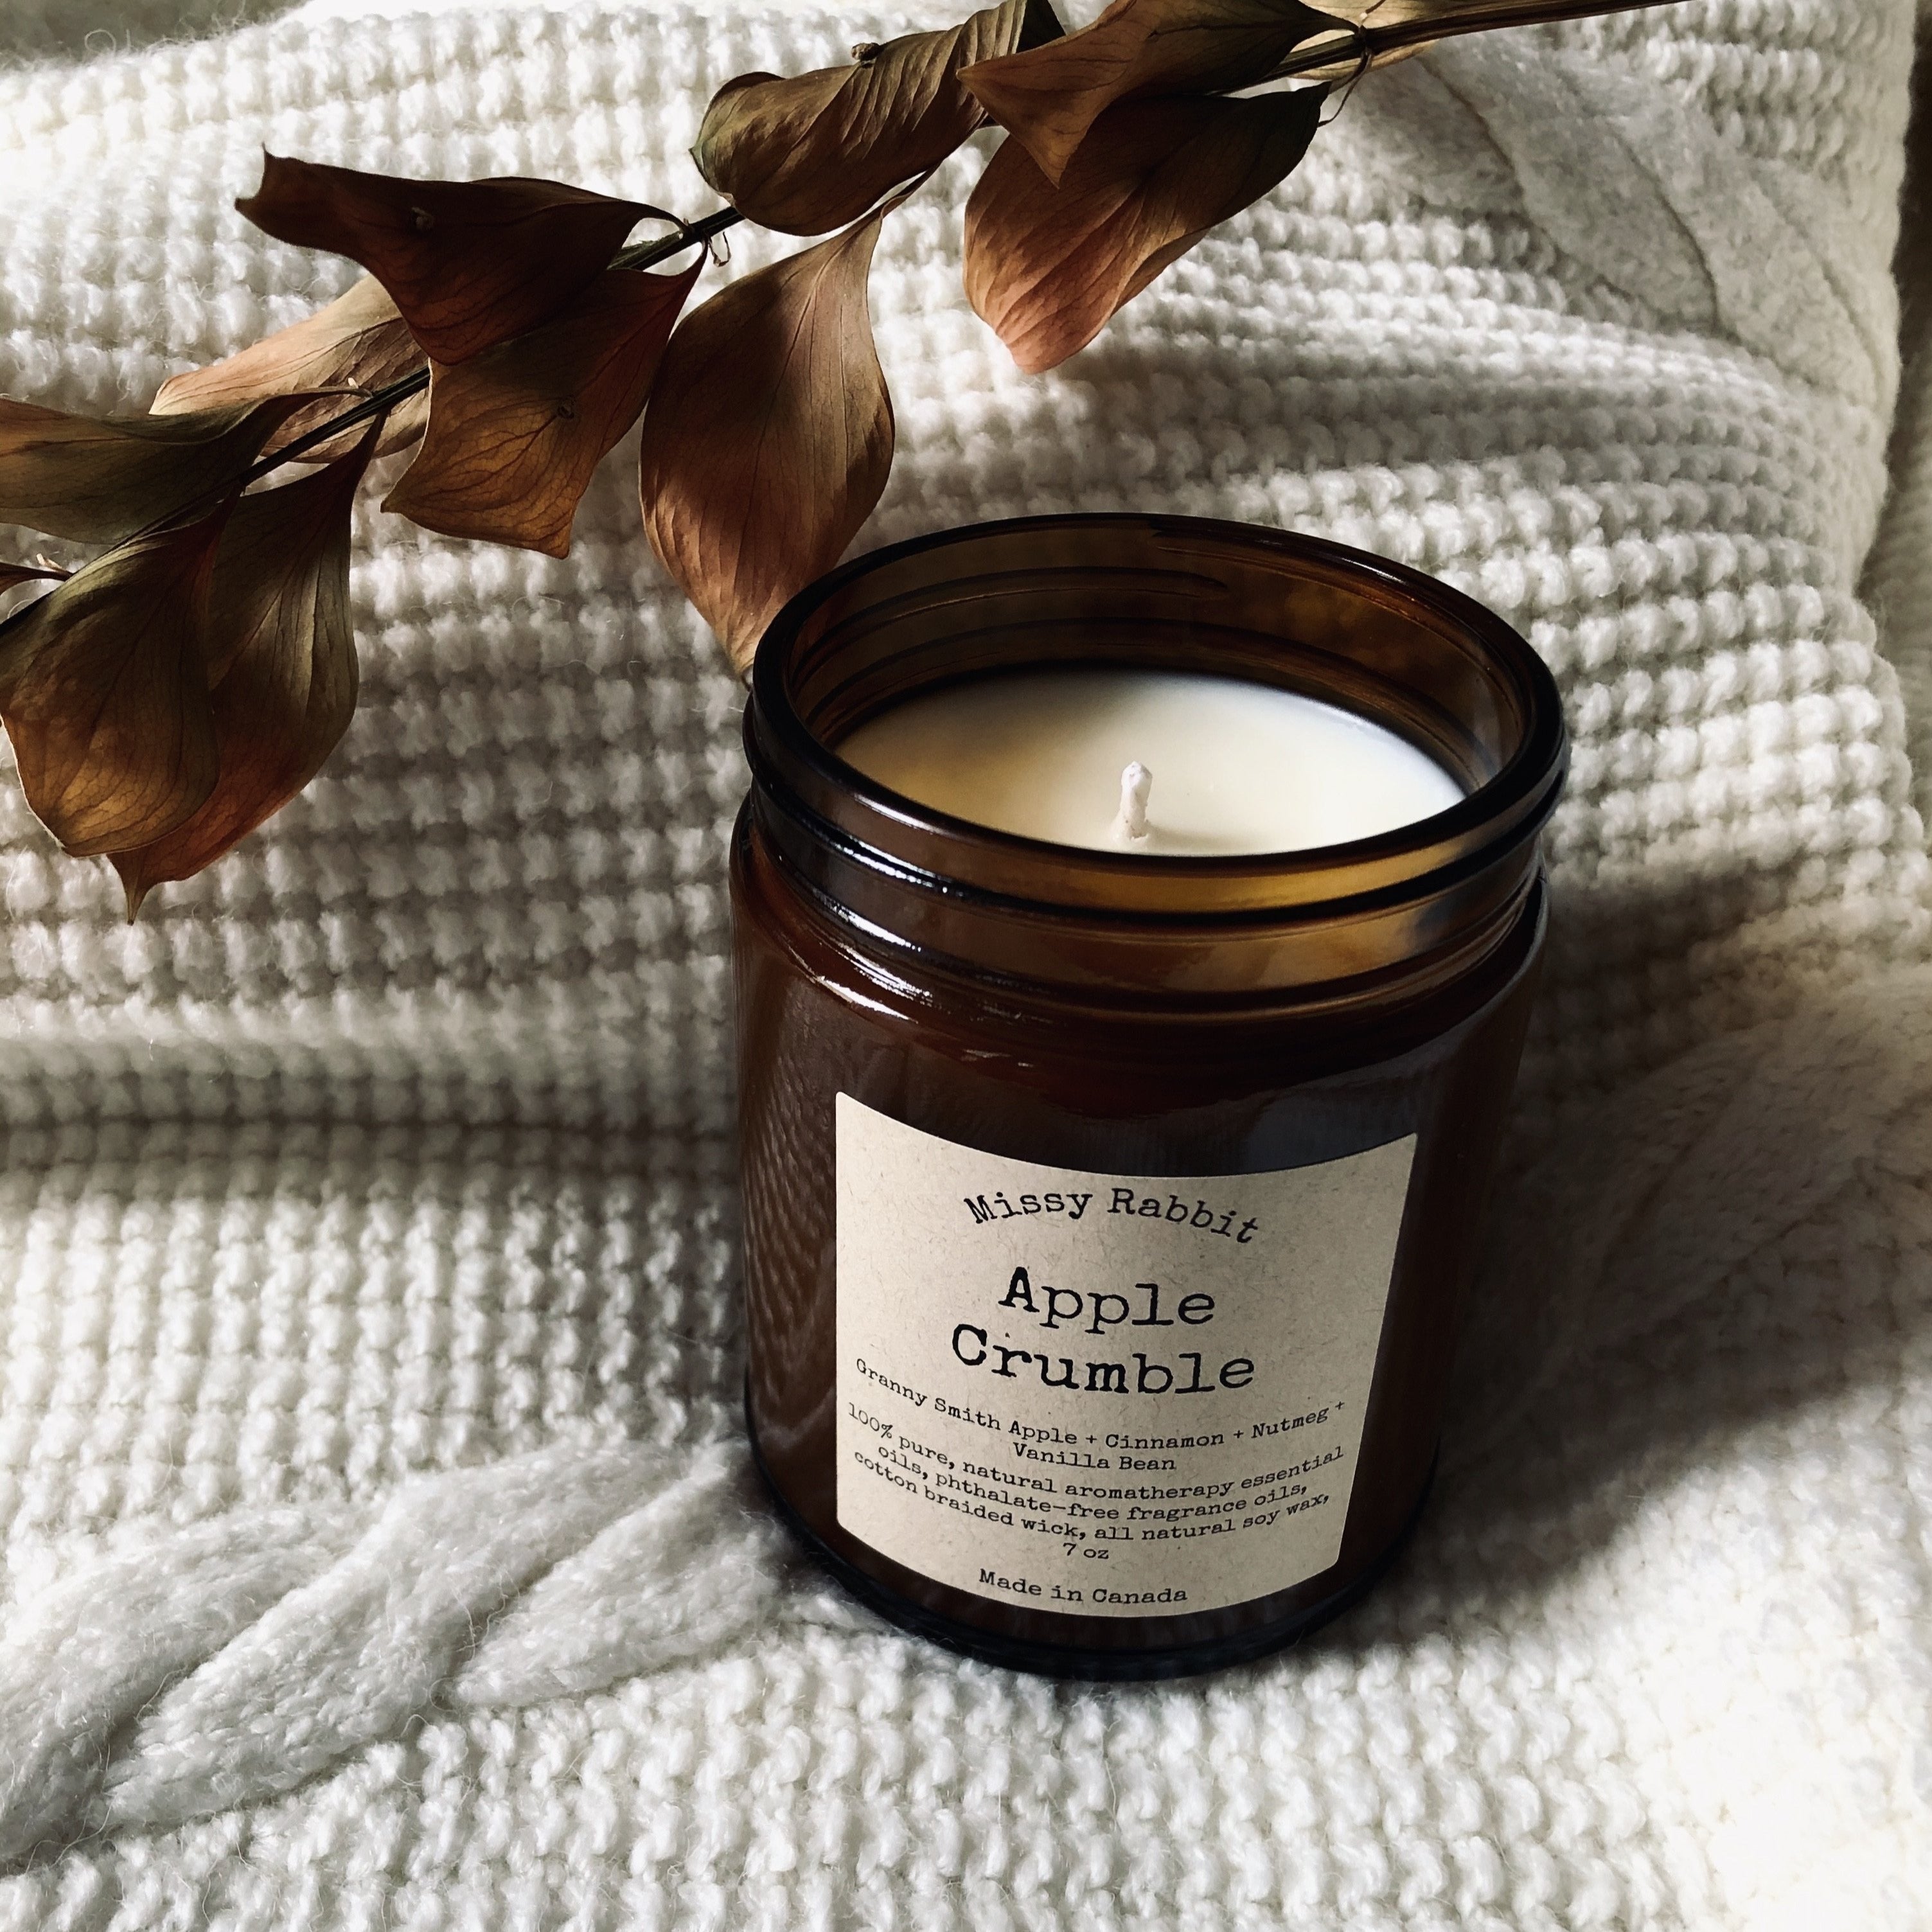 Apple Crumble Handcrafted Soy Candle – Missy Rabbit